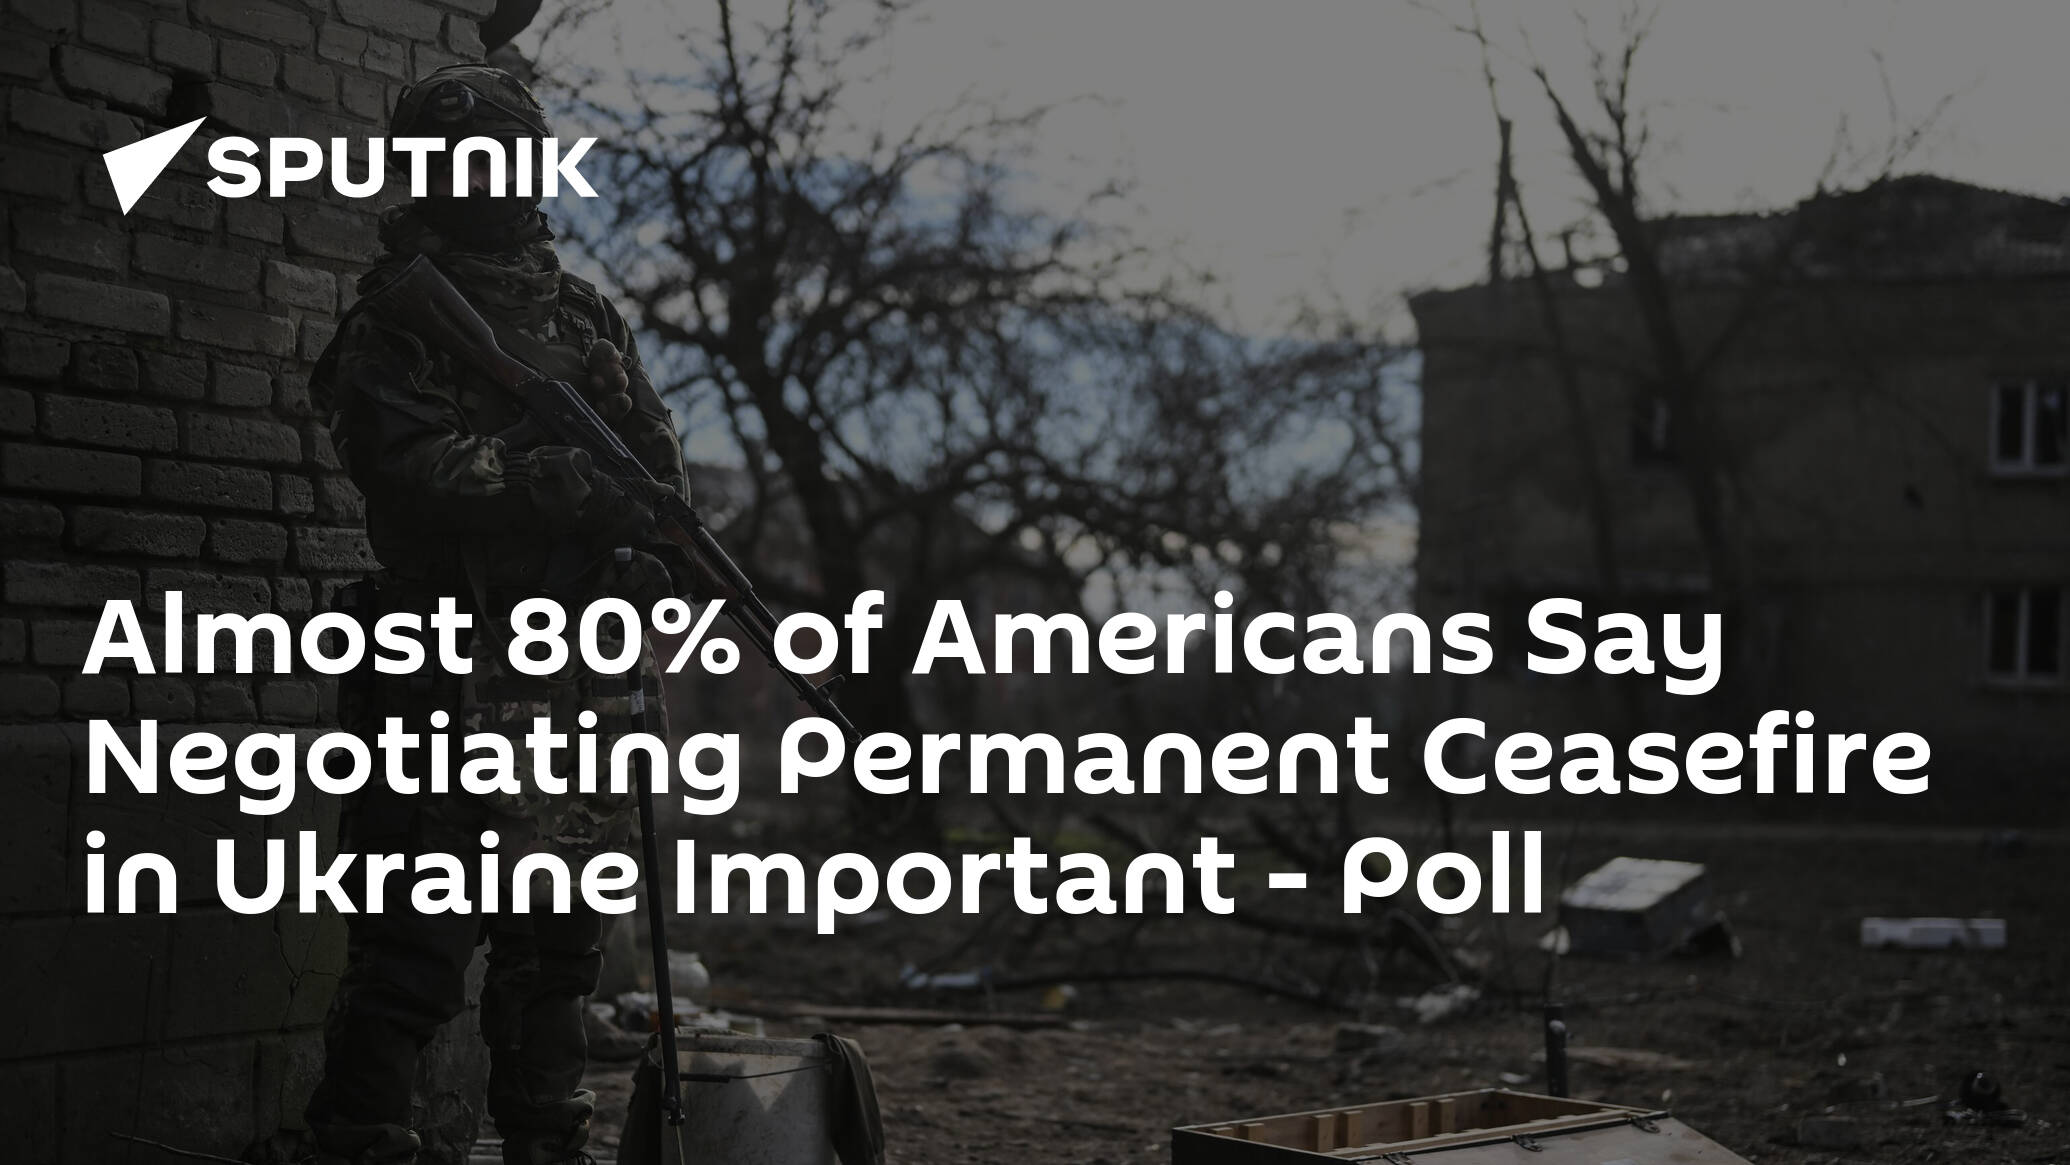 Almost 80% of Americans Say Negotiating Permanent Ceasefire in Ukraine Important – Poll